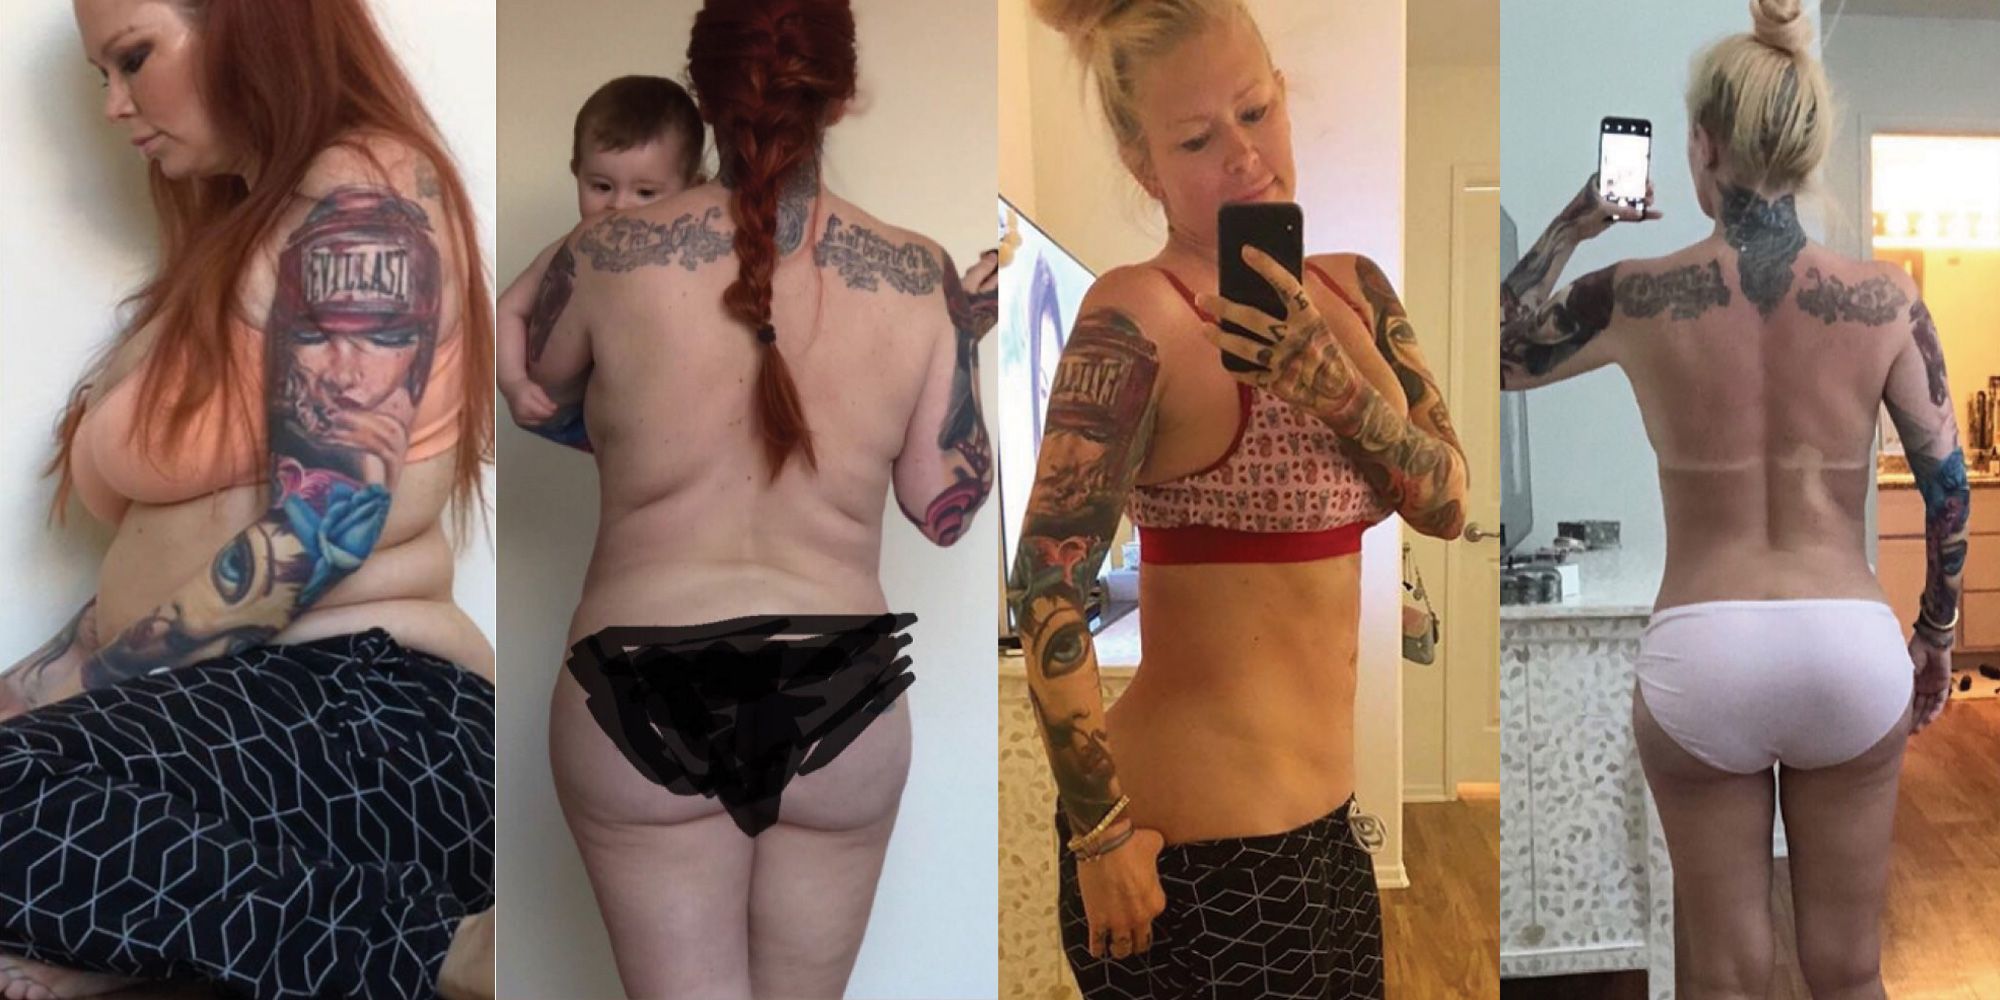 Jenna Jameson Says Keto Diet Helped Her Lose 57 Pounds Curb Cravings